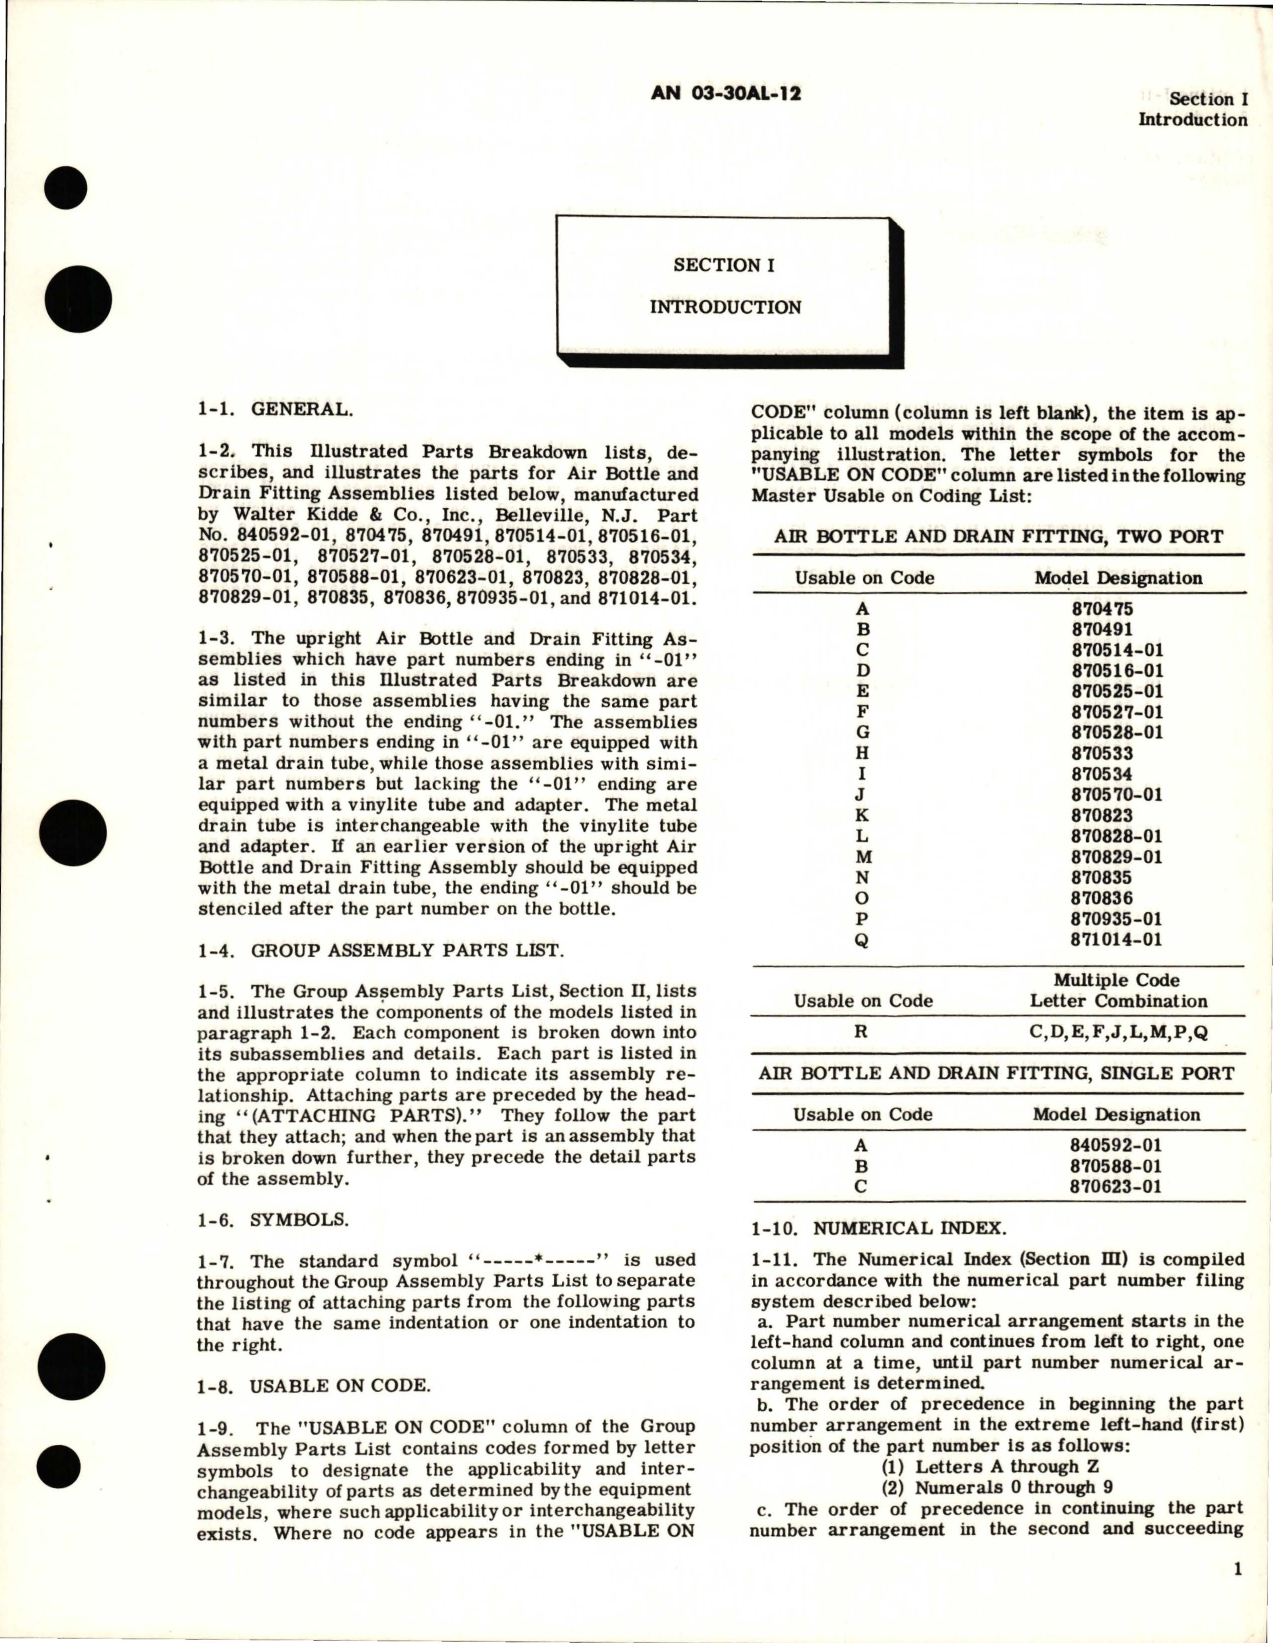 Sample page 5 from AirCorps Library document: Illustrated Parts Breakdown for Air Bottles and Drain Fittings 